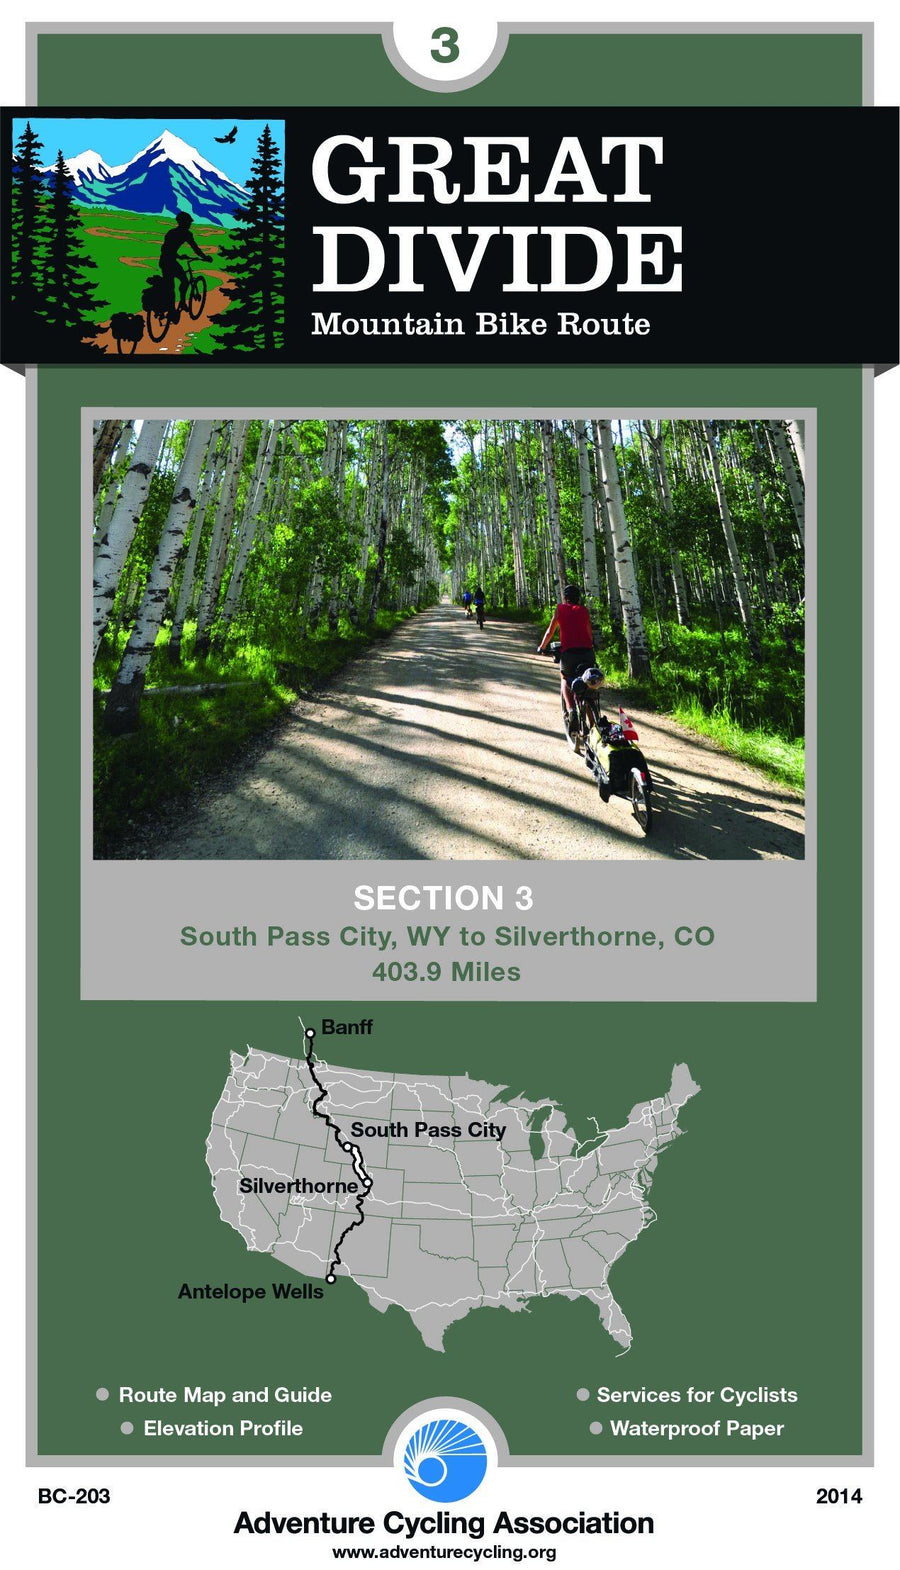 Great Divide Mountain Bike Route n° 3 - South Pass City, Wyoming - Silverthorne, Colorado (404 miles) | Adventure Cycling Association carte pliée Adventure Cycling Association 